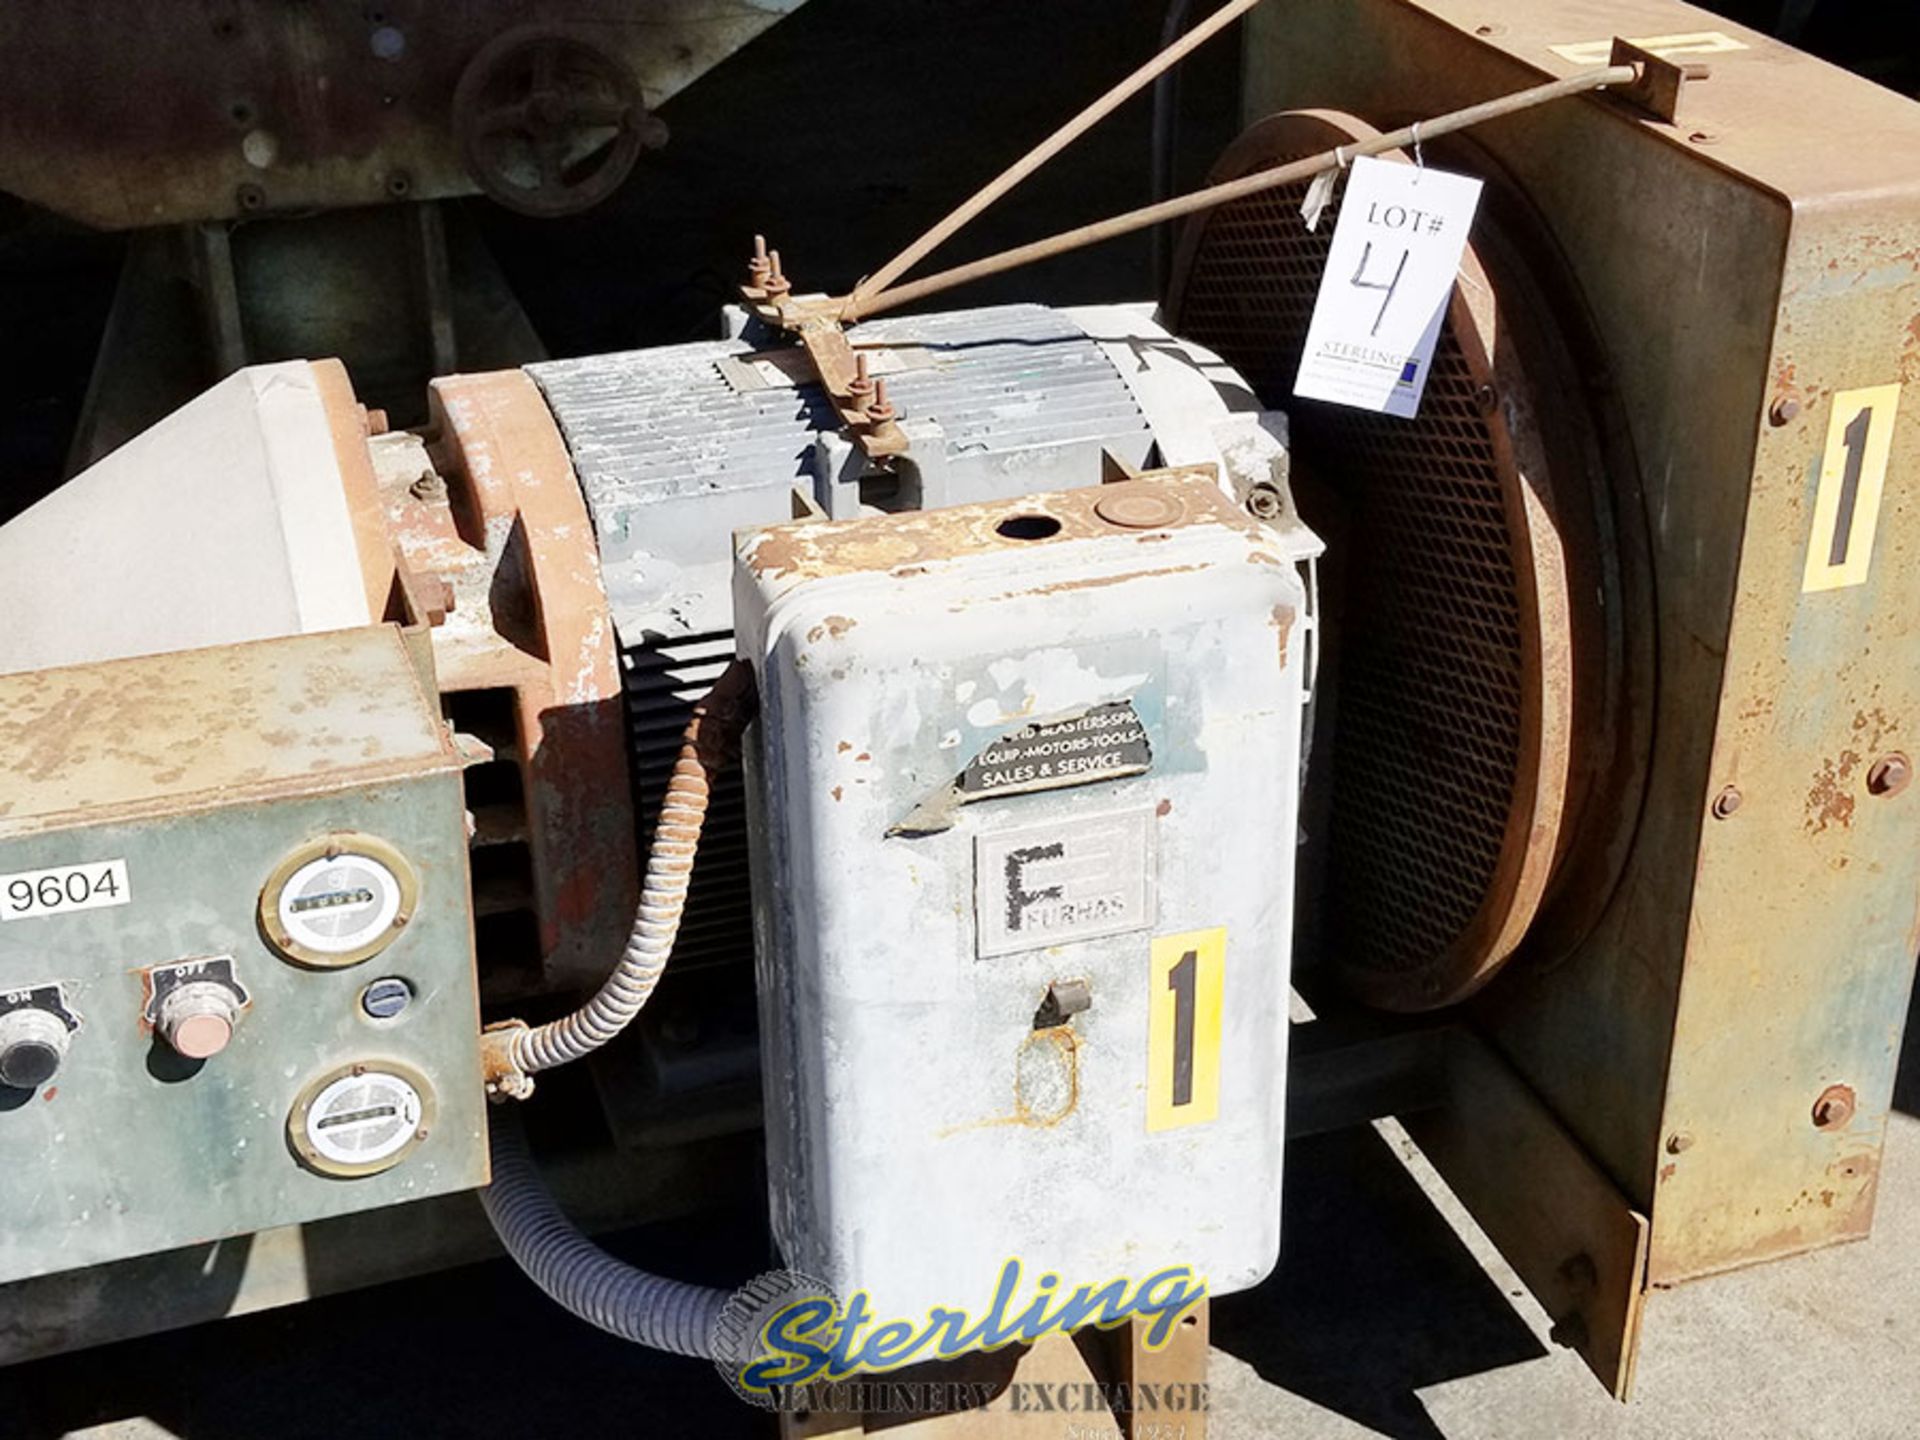 210 CFM Used Hydrovane Rotaryvane Air Compressor, Mdl. 170 CK, Fan Type Oil - Image 6 of 8